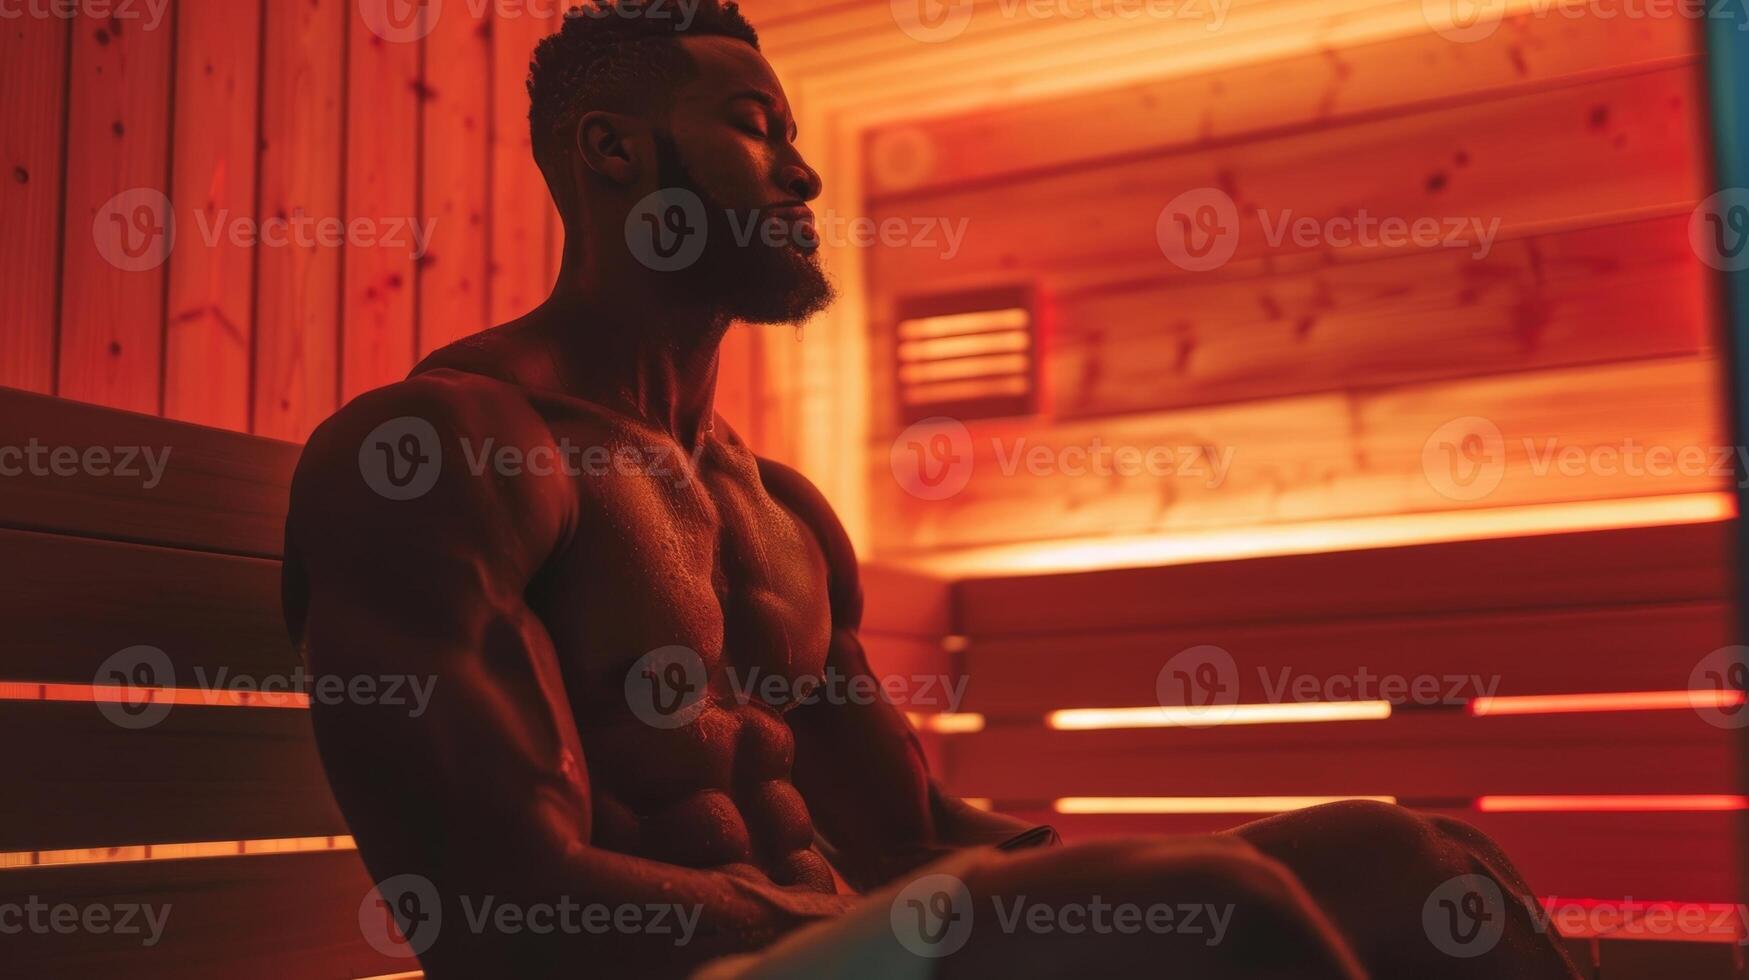 A photo of a weightlifter using a sauna emphasizing how saunas can increase muscle relaxation and mobility for better weightlifting form.